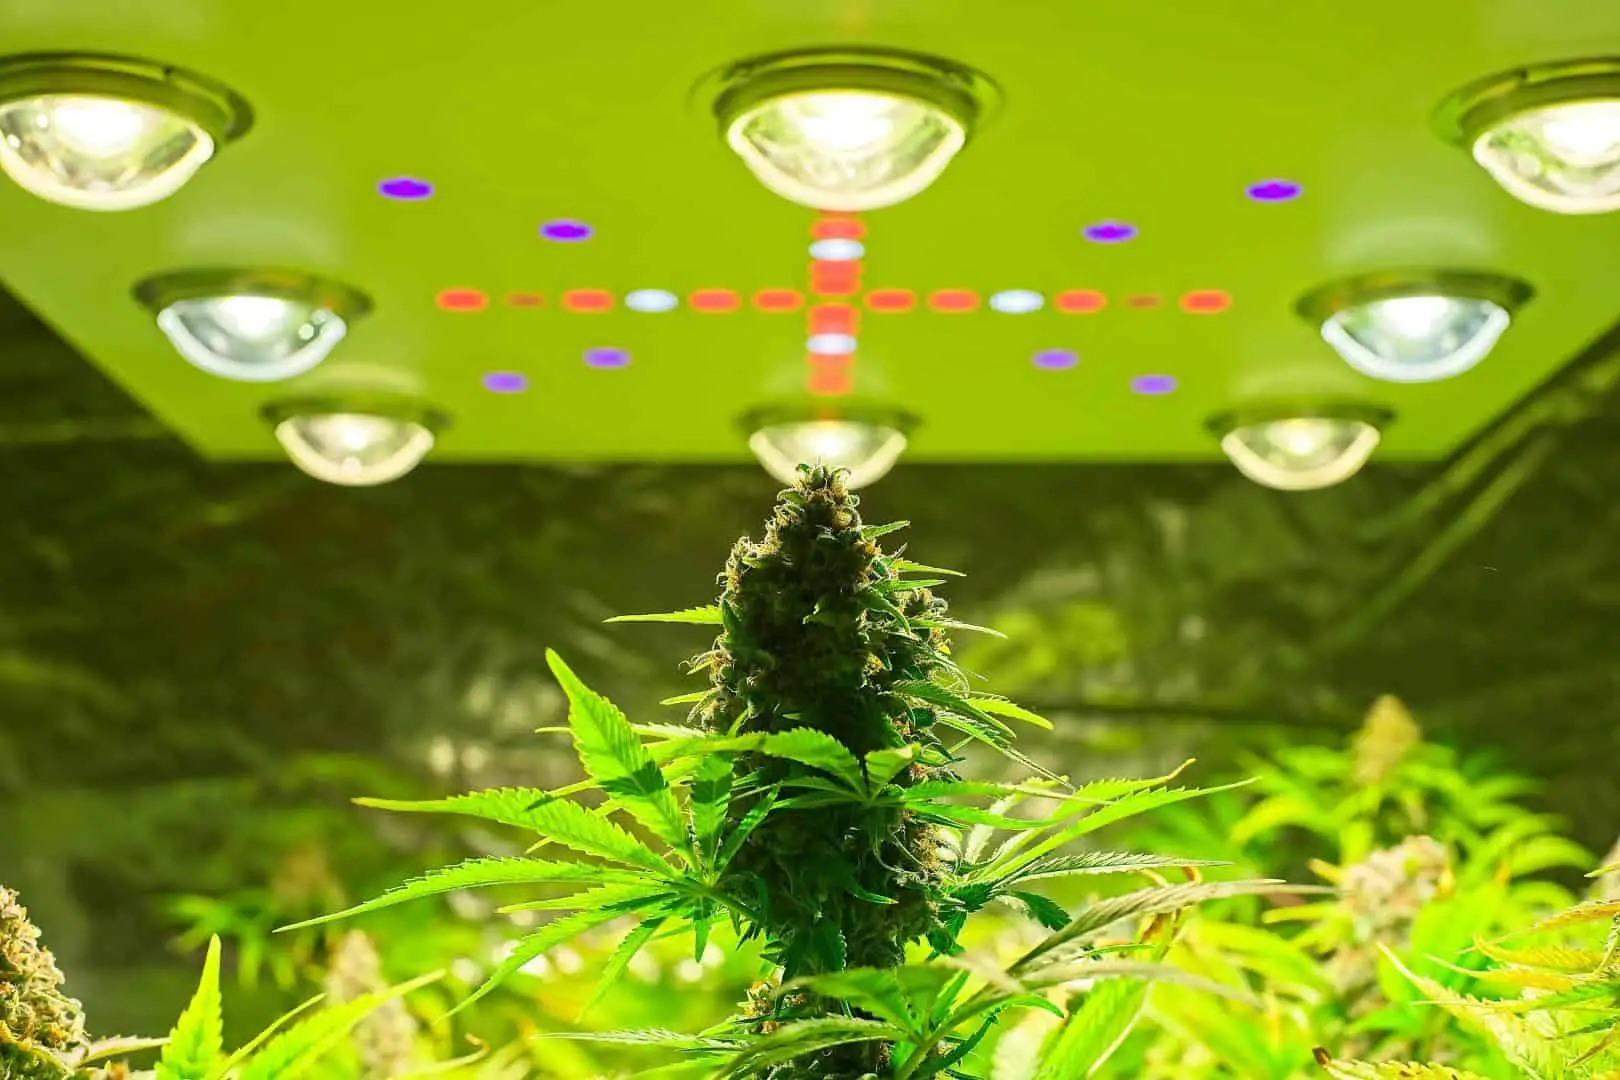 % Wondering whether you should use a grow light or sunlight to power your garden? Check out this article to learn more about each option!